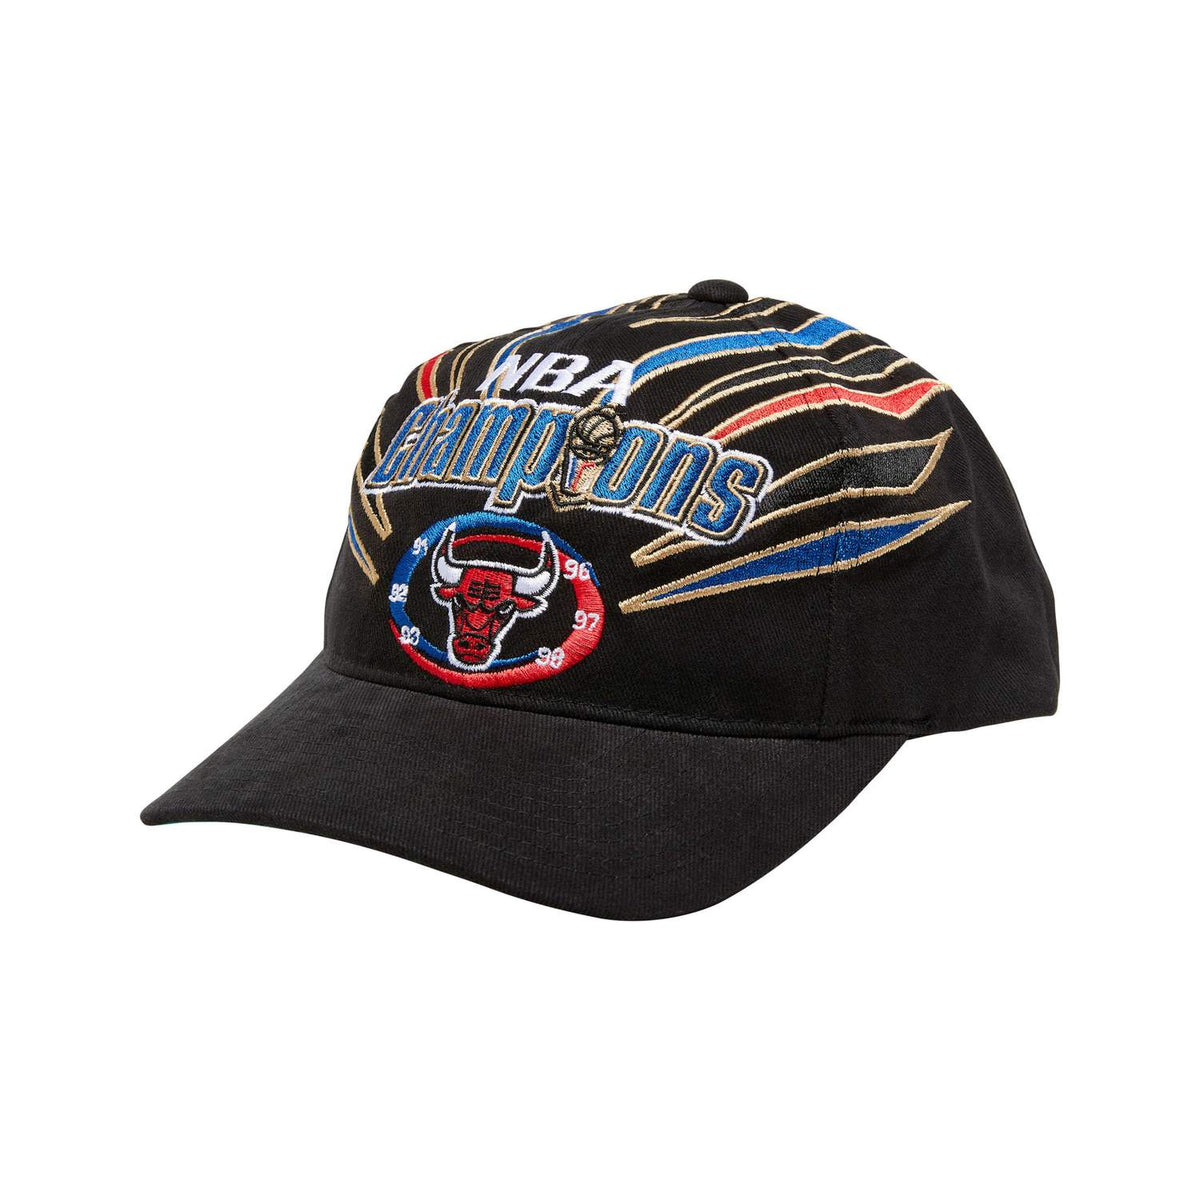 Bulls '1996 CHAMPIONS REPLICA SNAPBACK' Hat by Mitchell and Ness